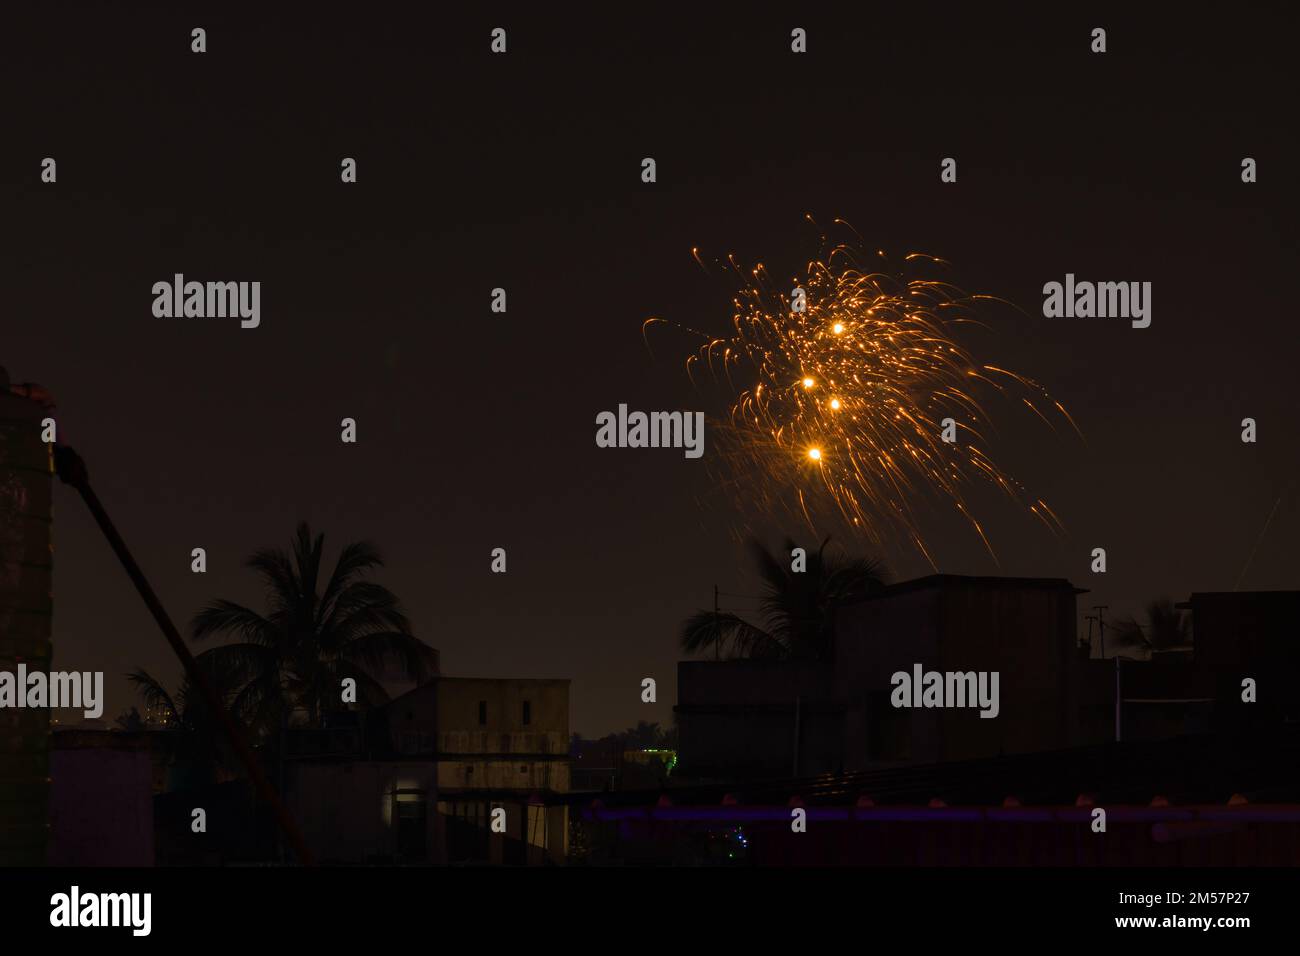 firework during celebration of new year, diwali and other festivals. shot taken against night sky. Stock Photo